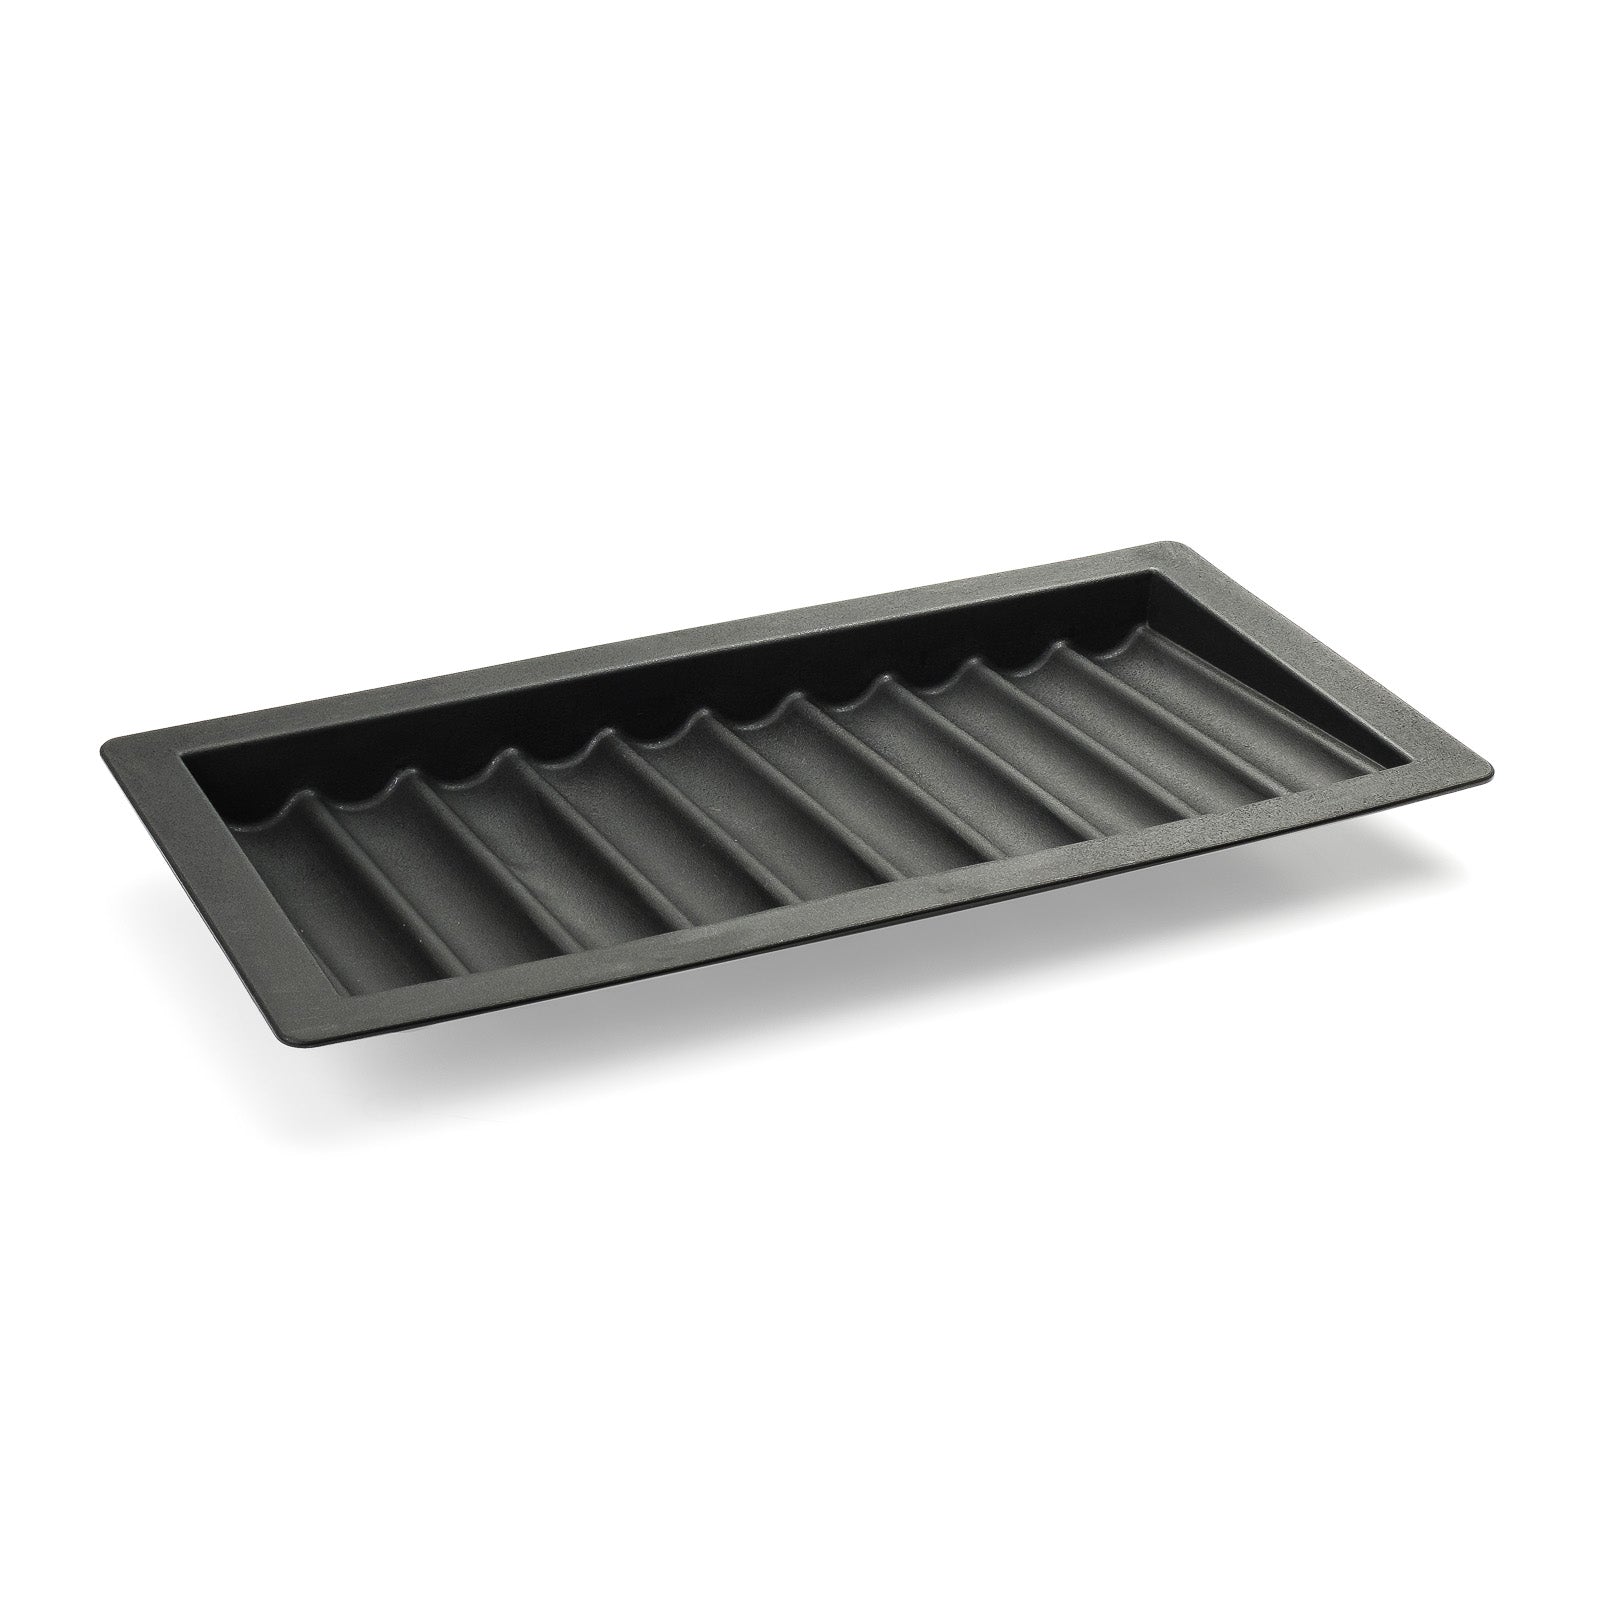 ABS Black Poker Chip Tray (10 Row / 500 Chip)